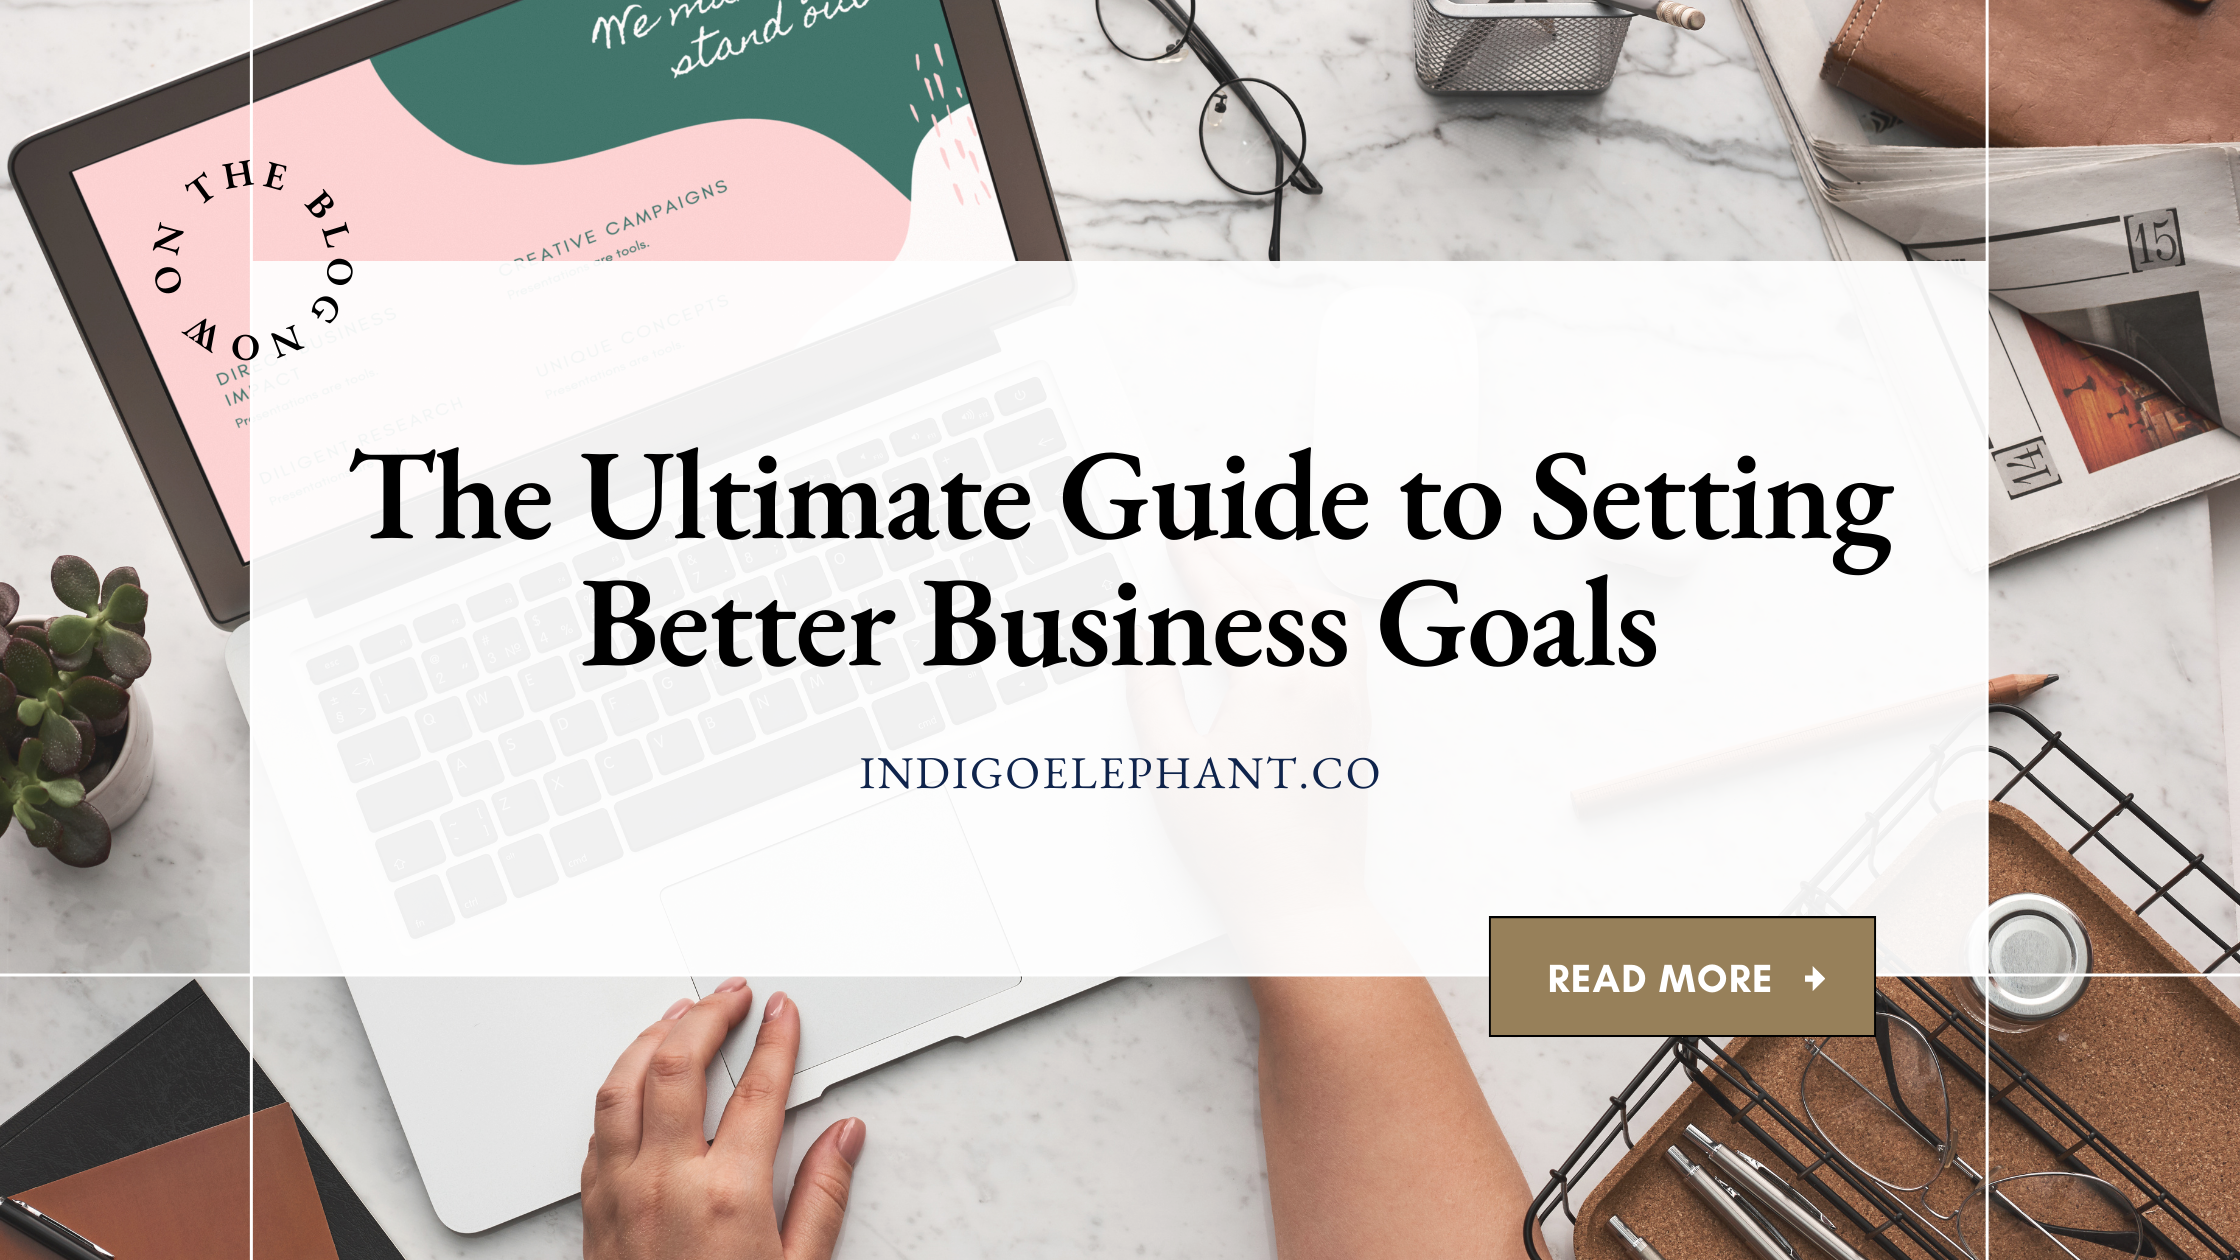 The Ultimate Guide to Setting Better Business Goals